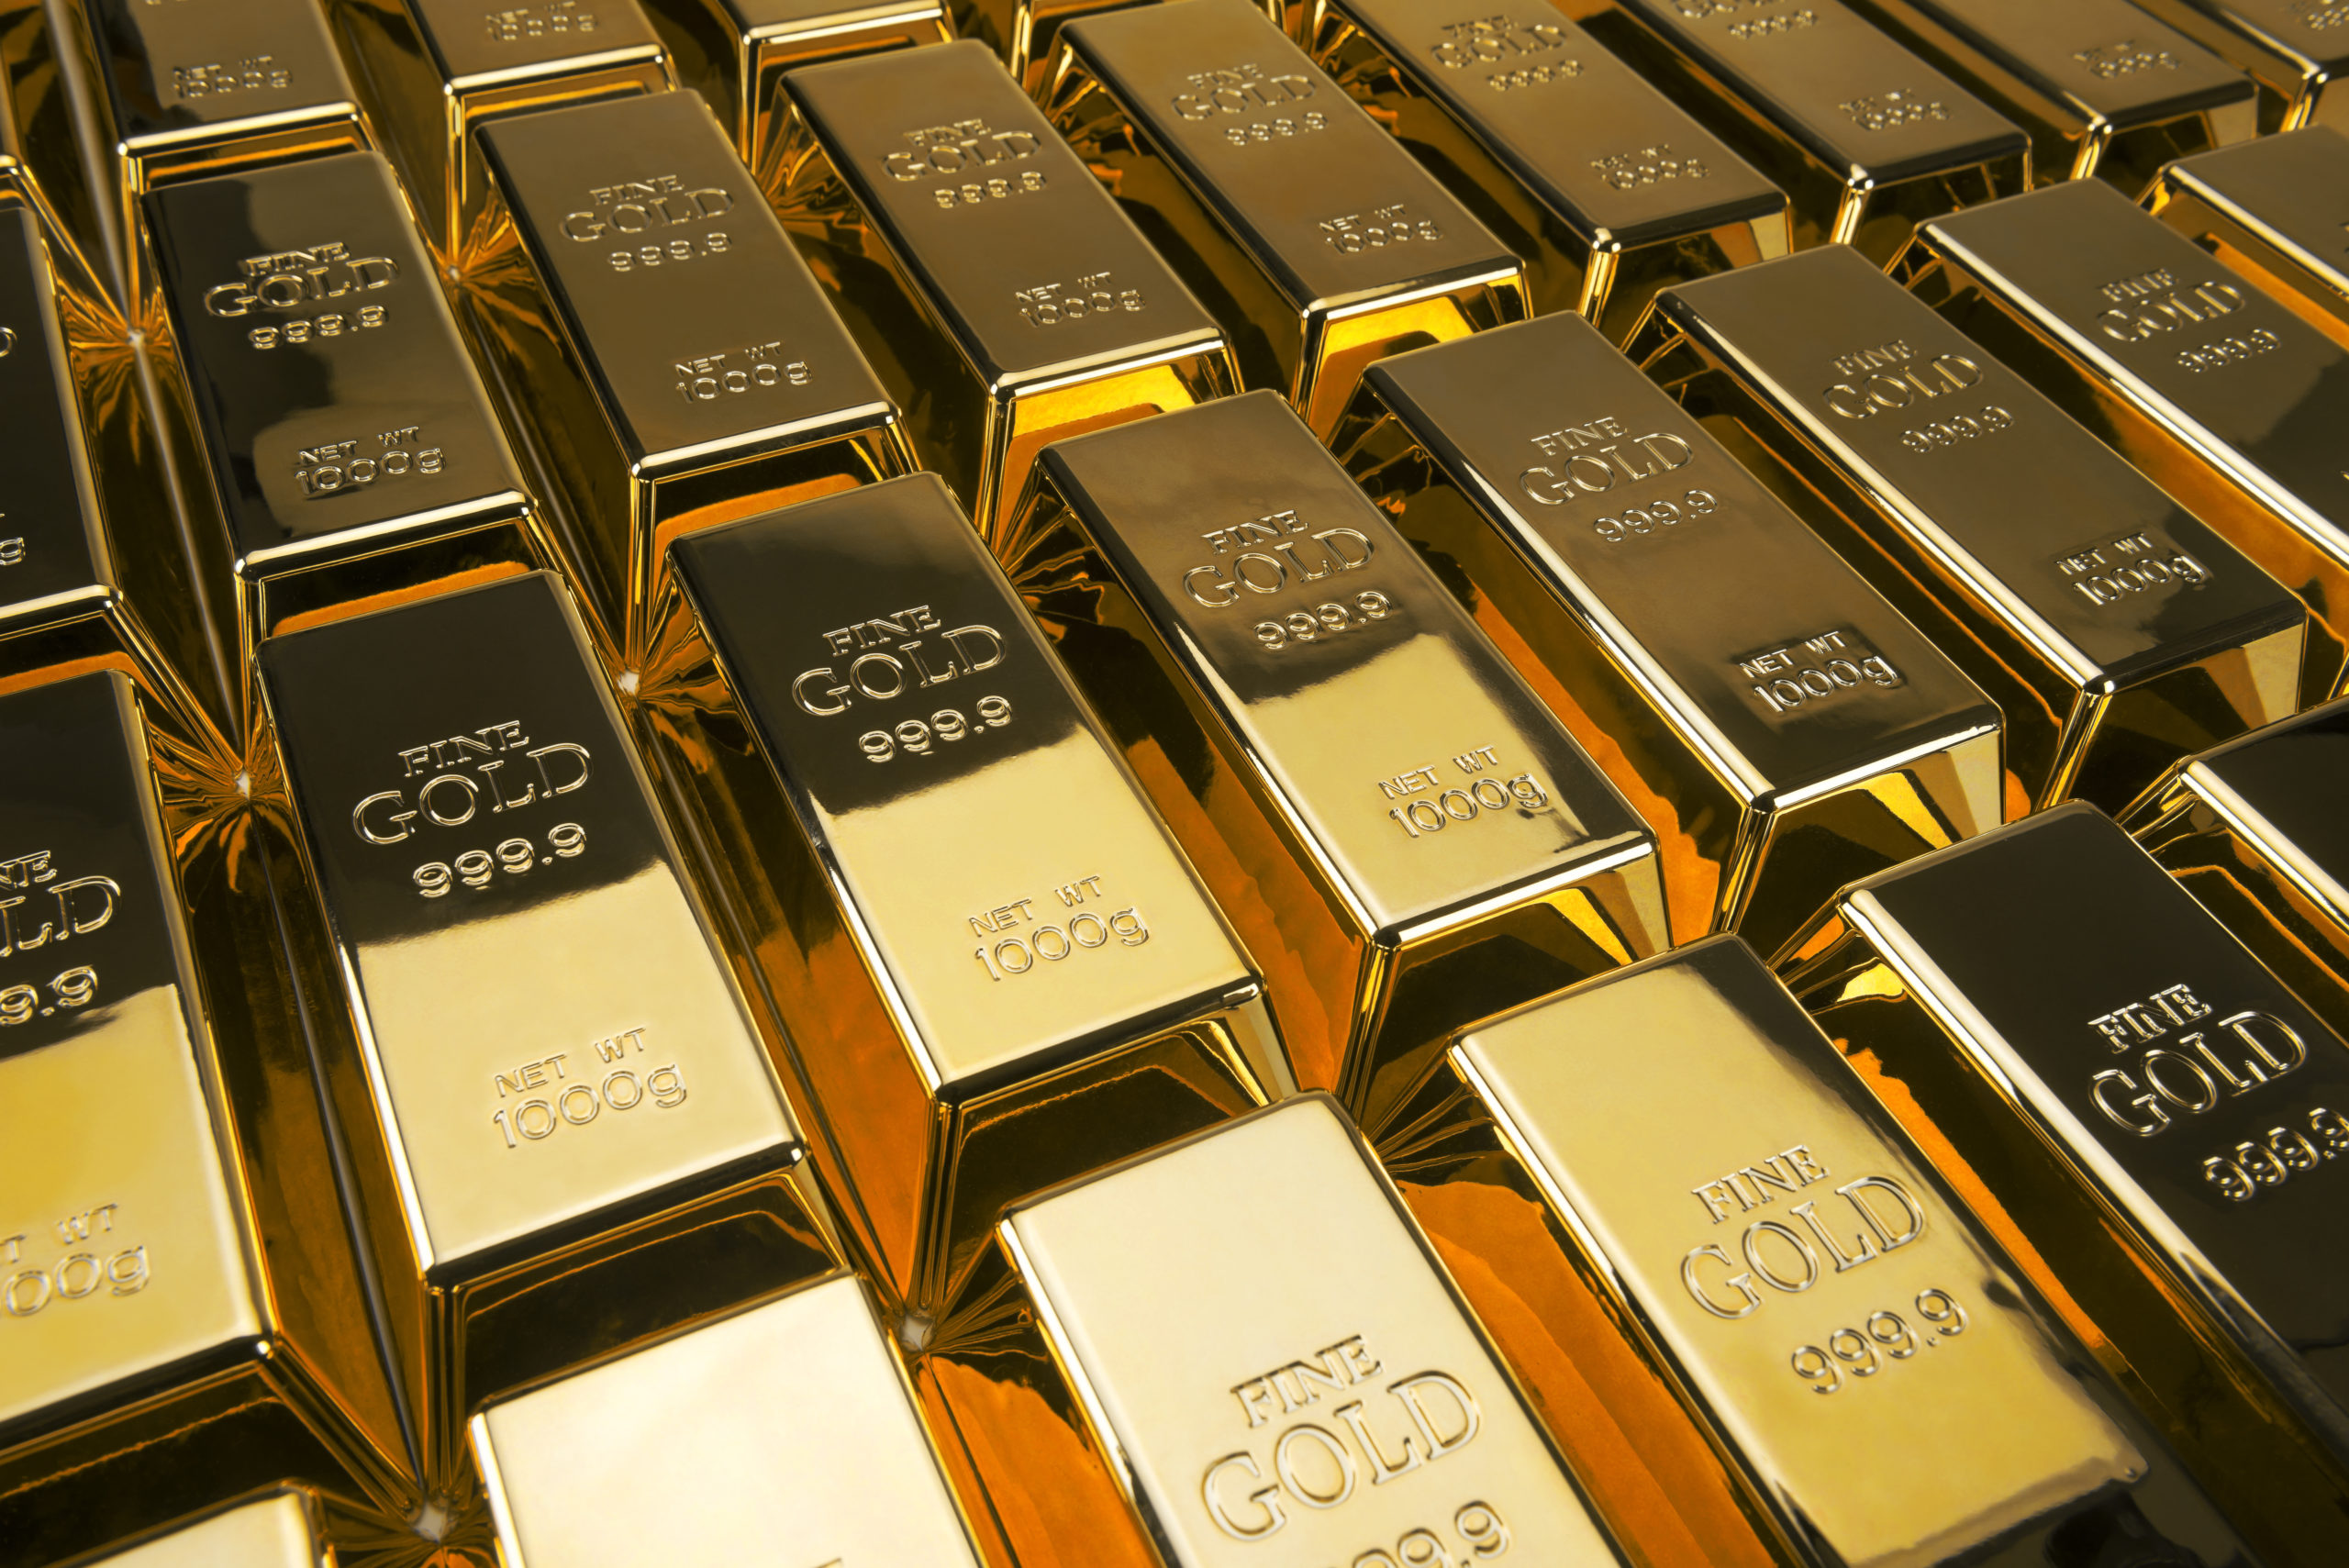 Golden Opportunity: Anticipating a Potential Buy Signal for Gold